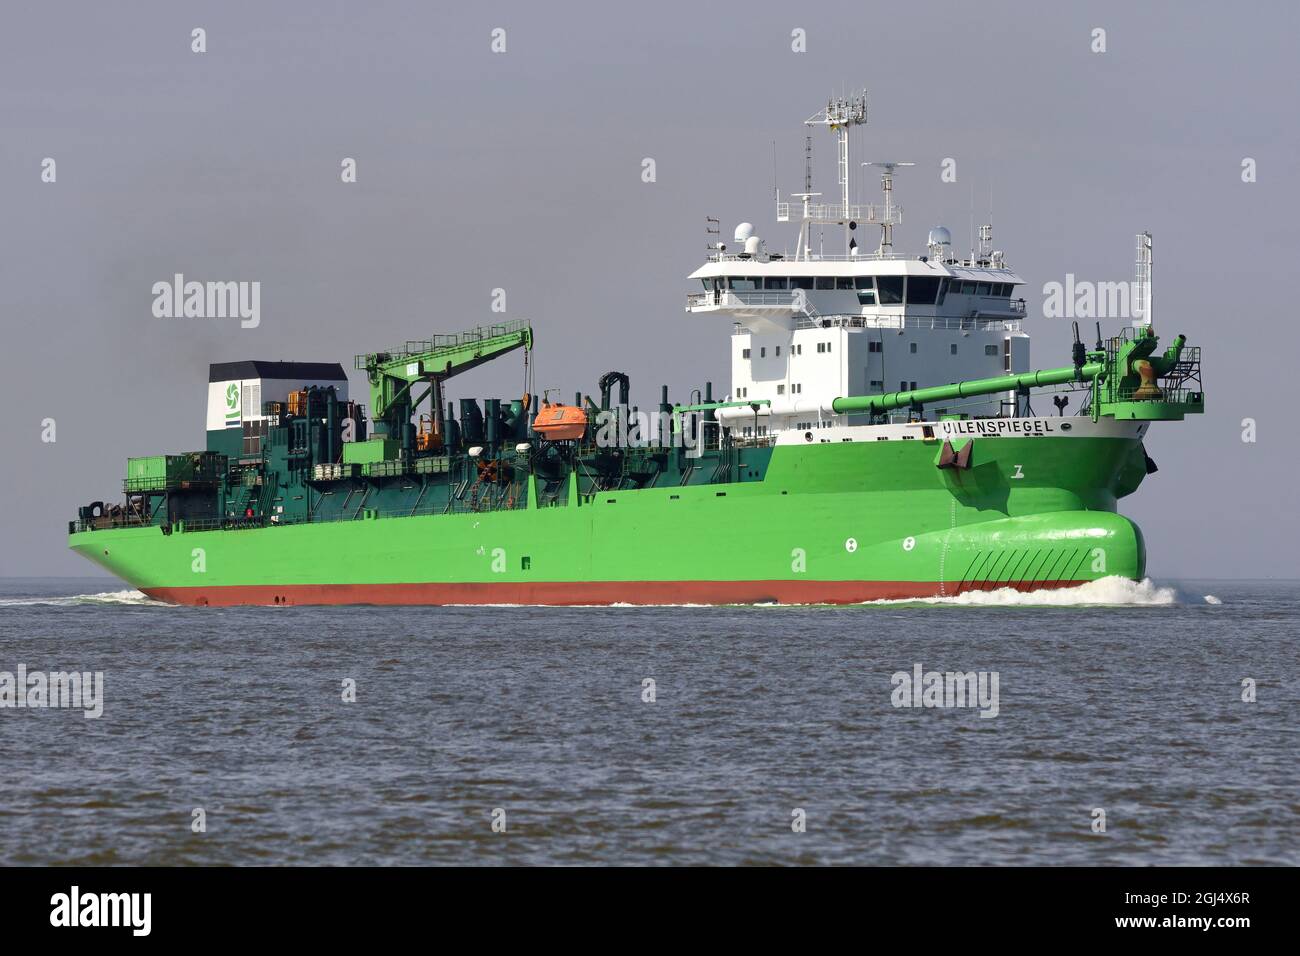 The hopper dredger Uilenspiegel is working on June 14, 2021 off Cuxhaven on the Elbe. Stock Photo